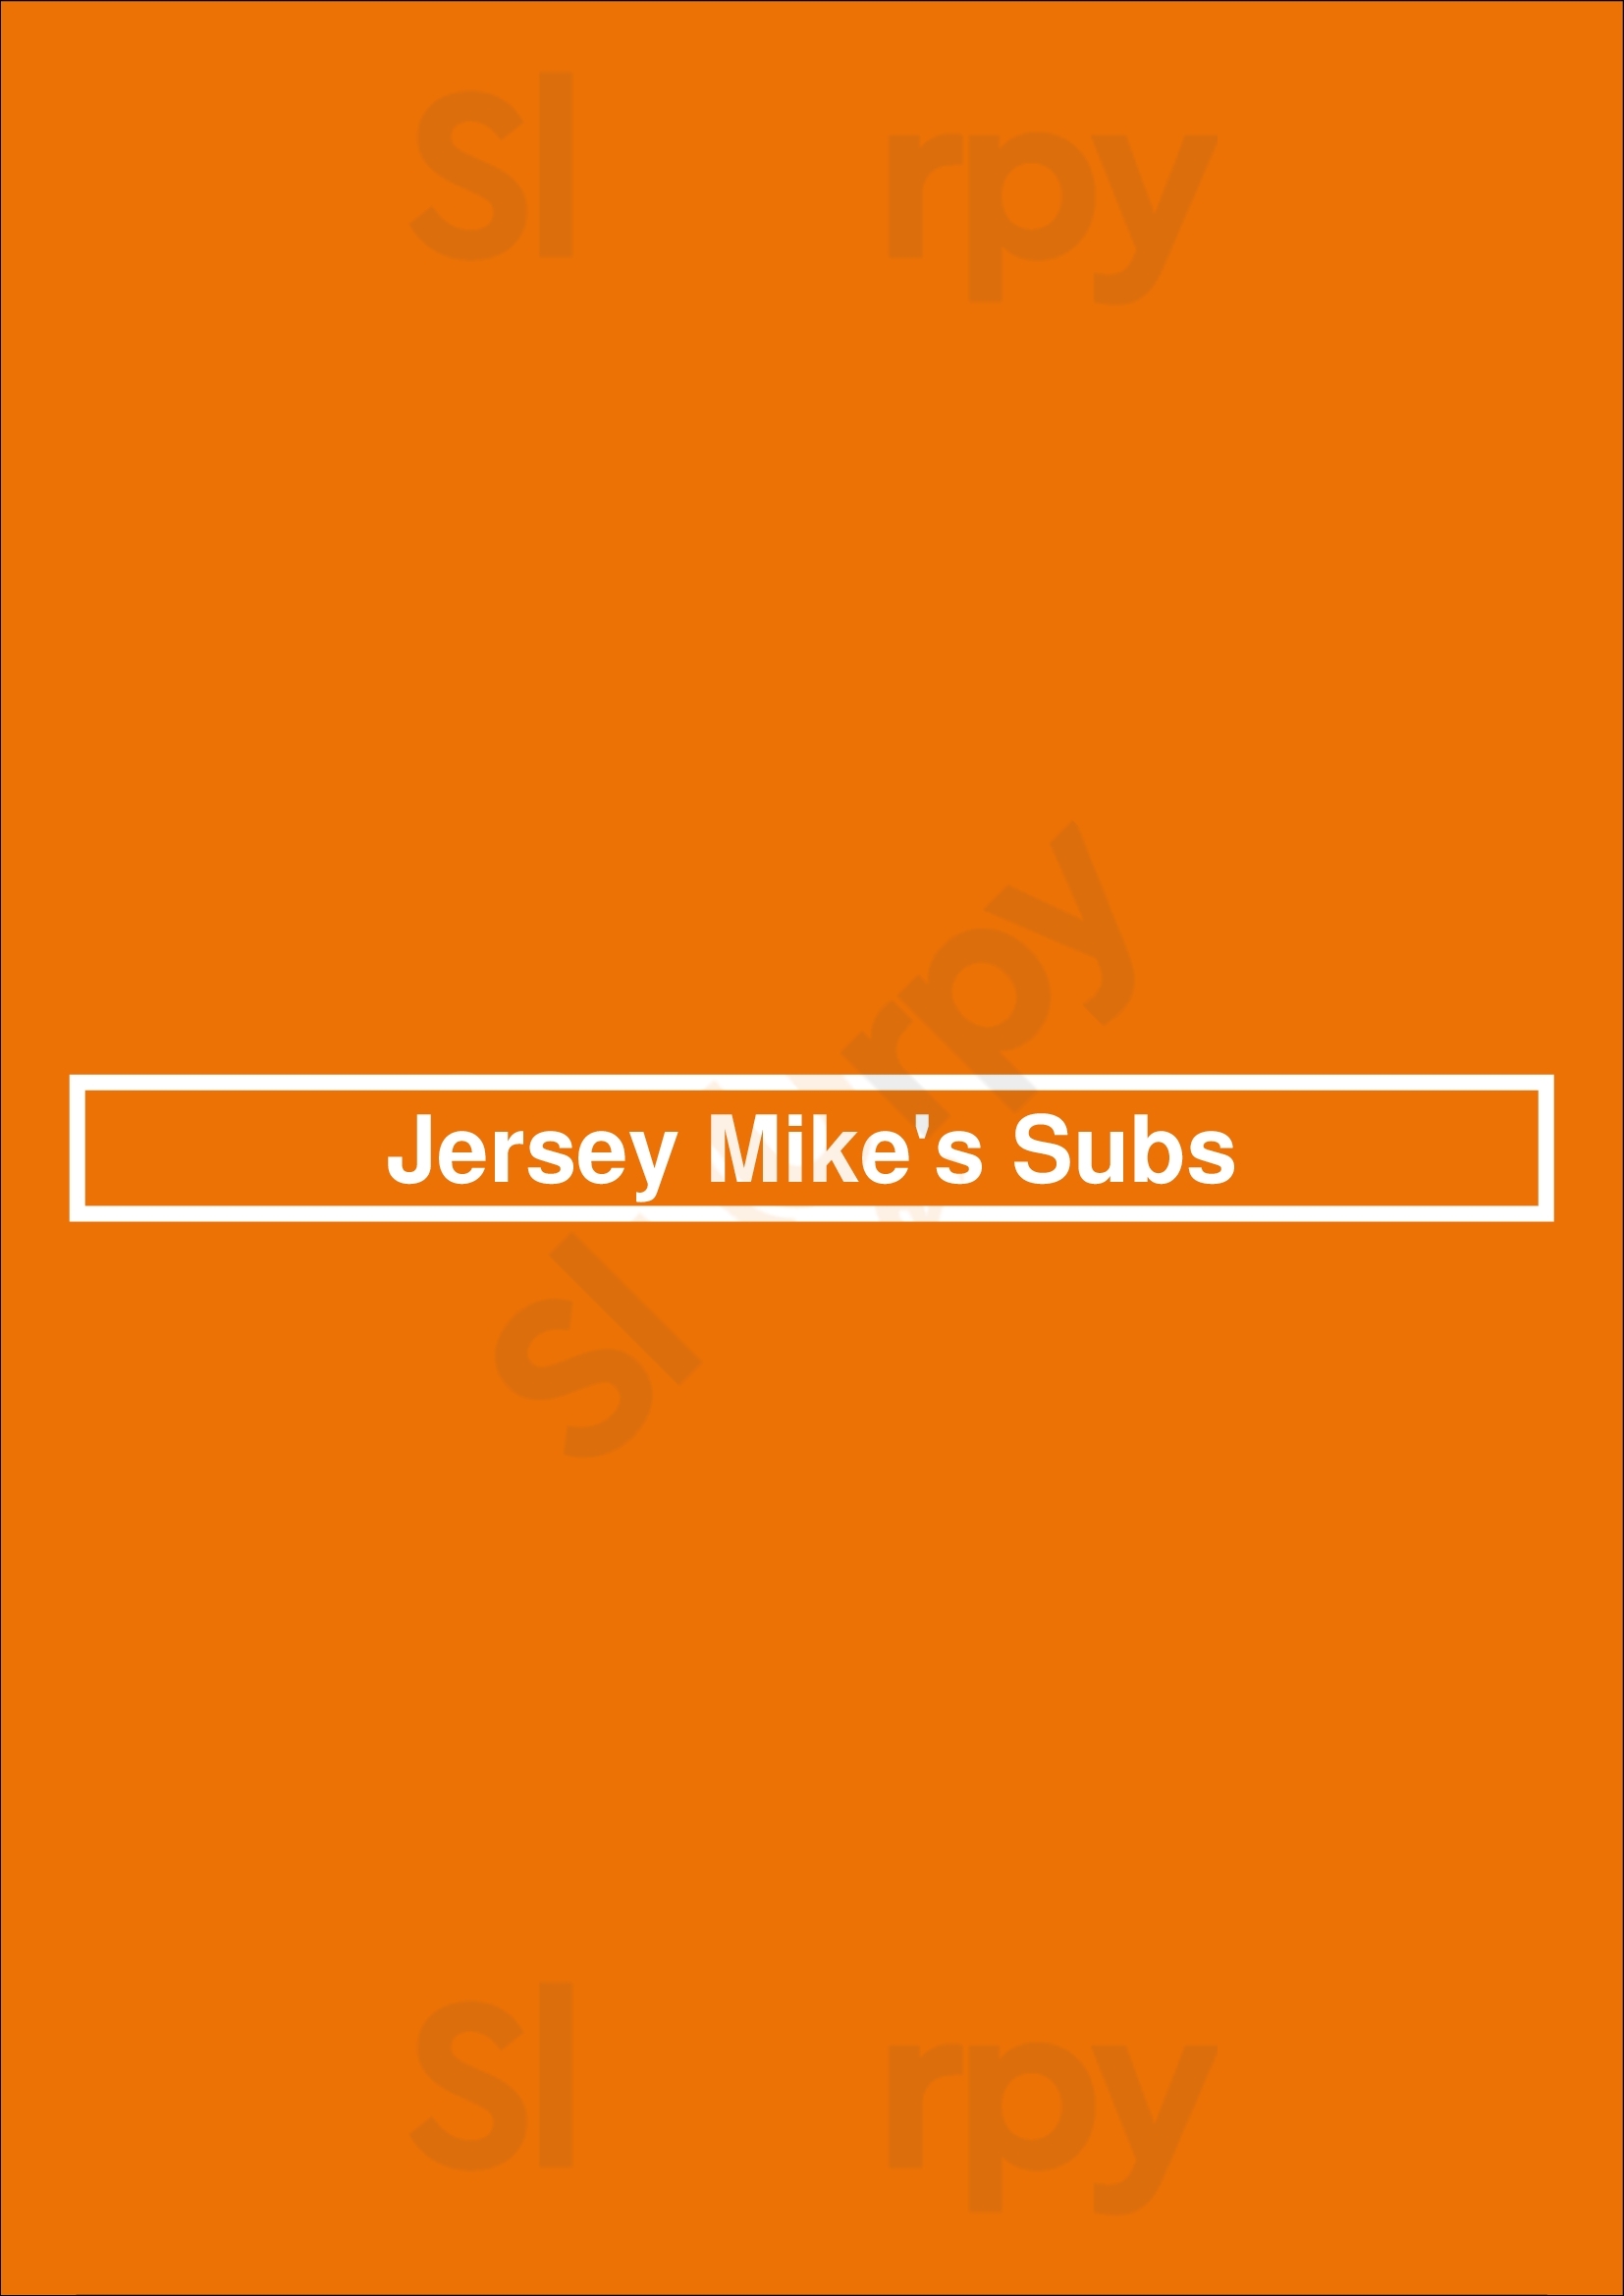 Jersey Mike's Subs Fort Myers Menu - 1